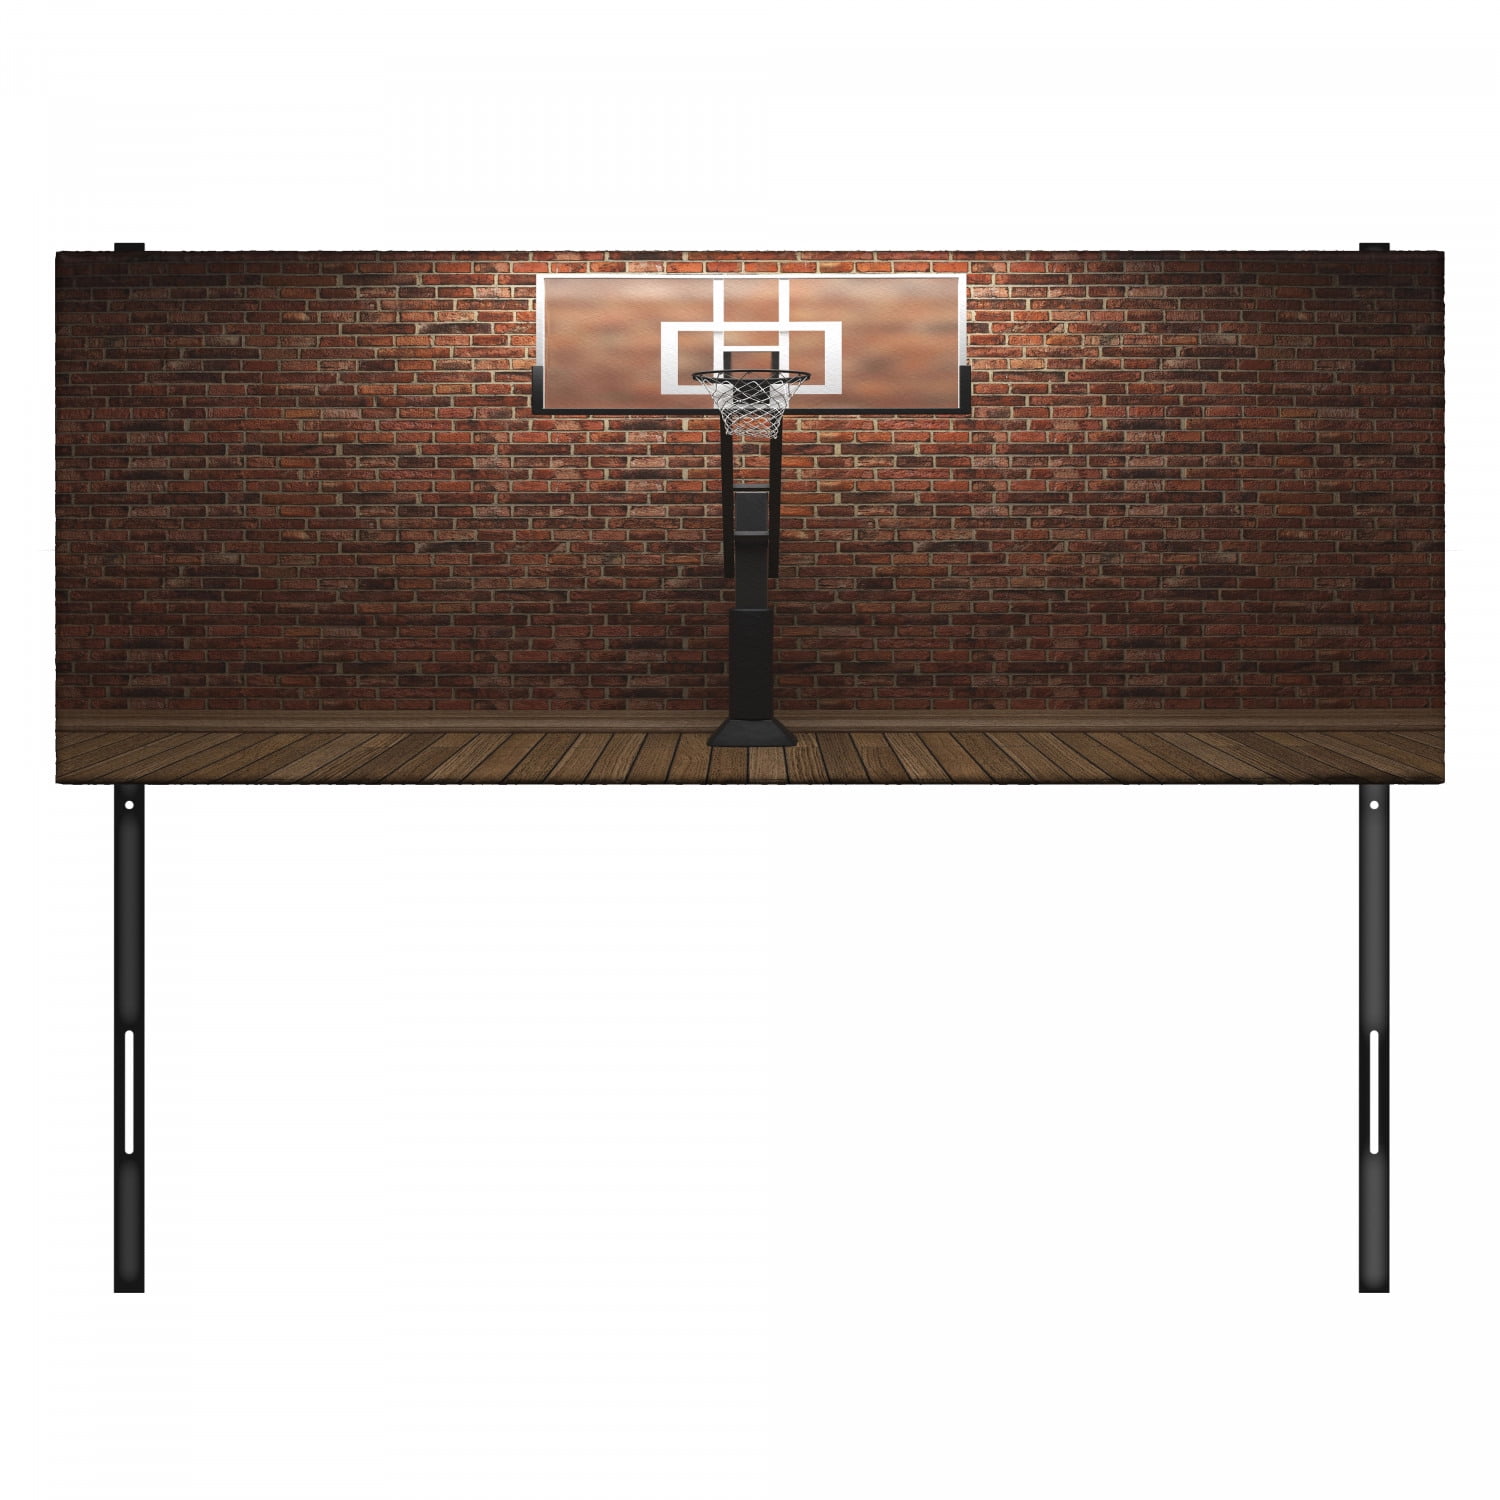 Basketball Headboard, Old Brick Wall and Basketball Hoop Rim Indoor  Training Exercising Stadium Picture, Upholstered Decorative Metal Bed  Headboard with Memory Foam, King Size, Brown, by Ambesonne